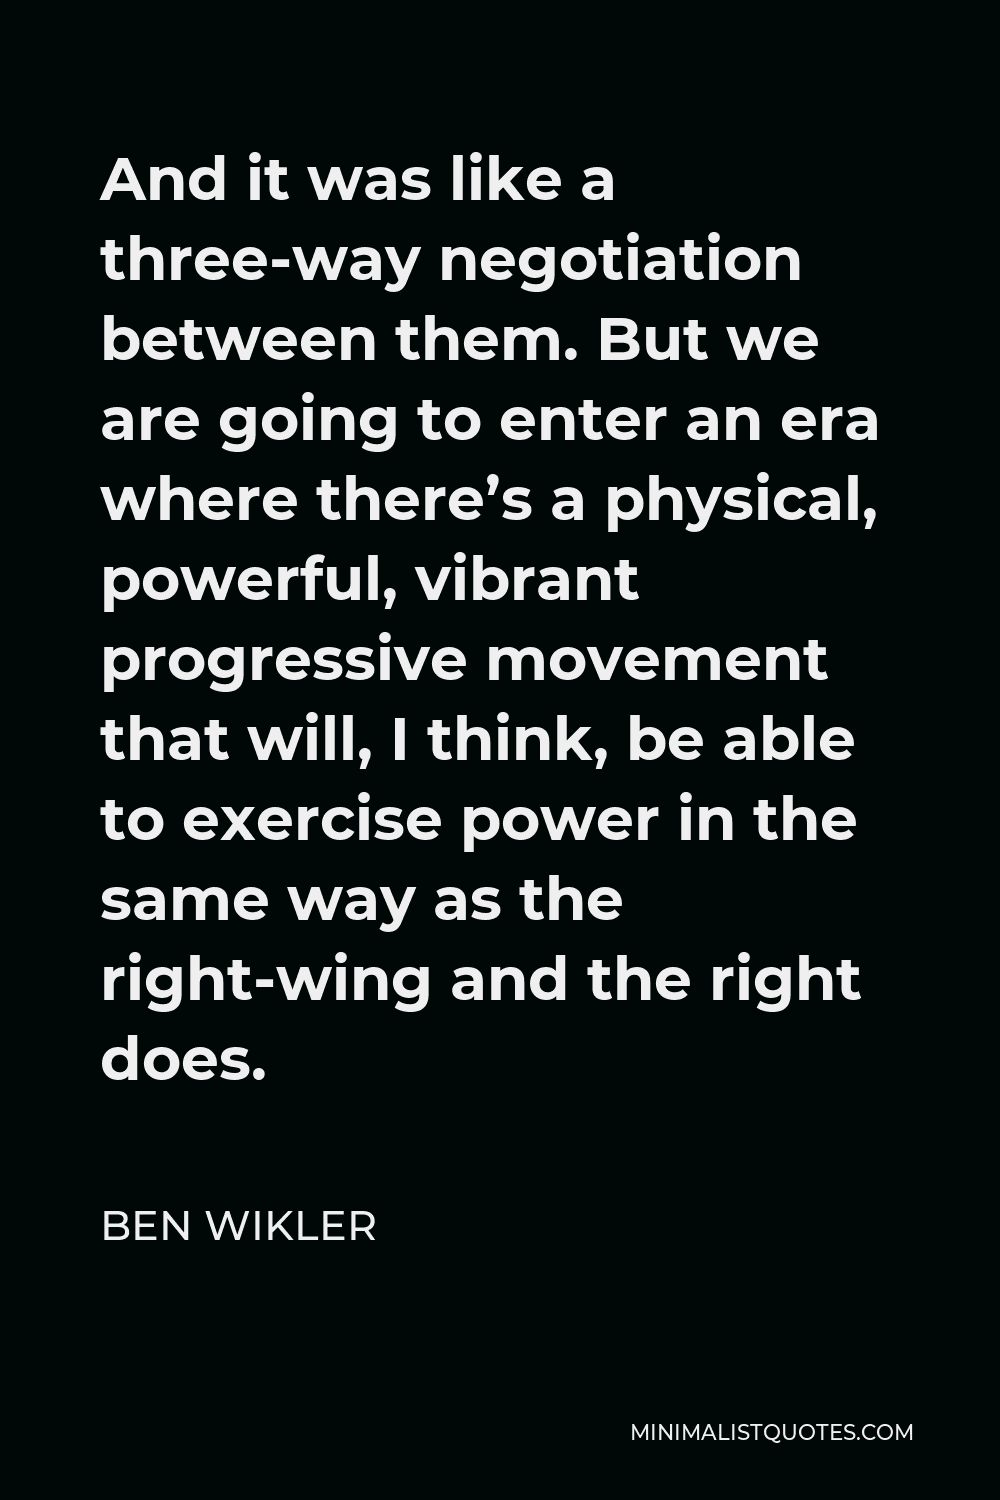 Ben Wikler Quote - And it was like a three-way negotiation between them. But we are going to enter an era where there’s a physical, powerful, vibrant progressive movement that will, I think, be able to exercise power in the same way as the right-wing and the right does.